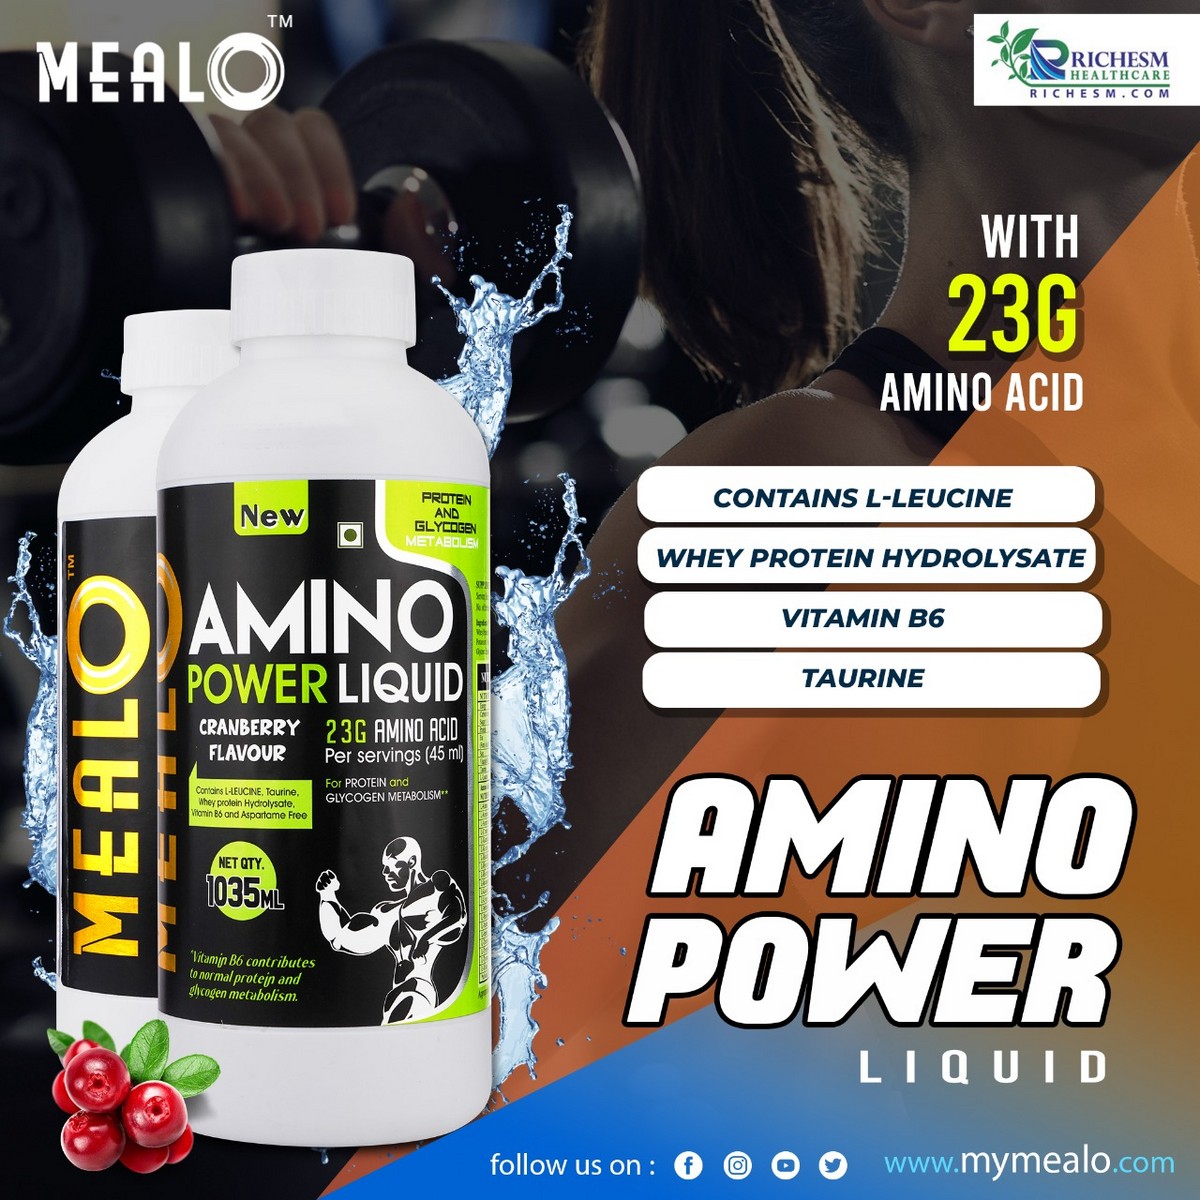 Bring Unbeatable Workout Energy with Amino Power